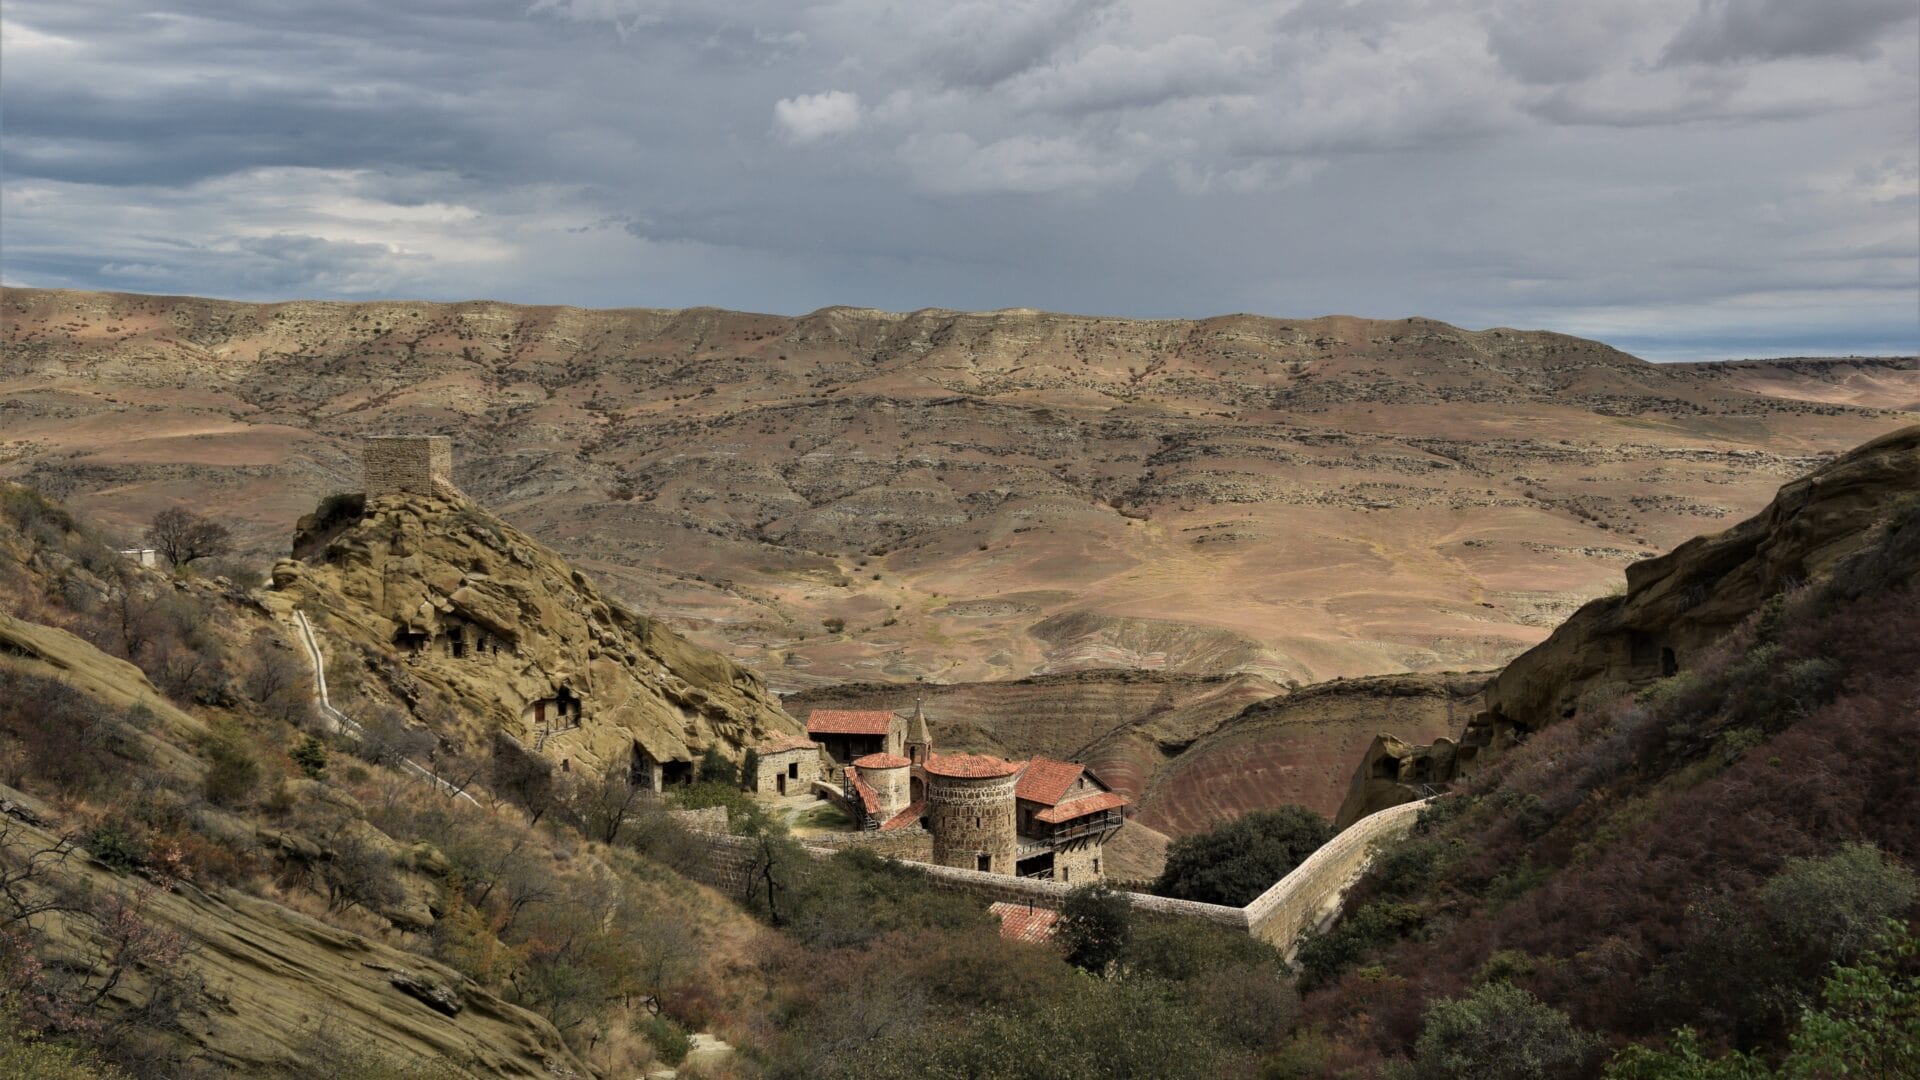 the dry hills of Georgia's southern steppe rise behind the red rooftops of David Gareja Monastery